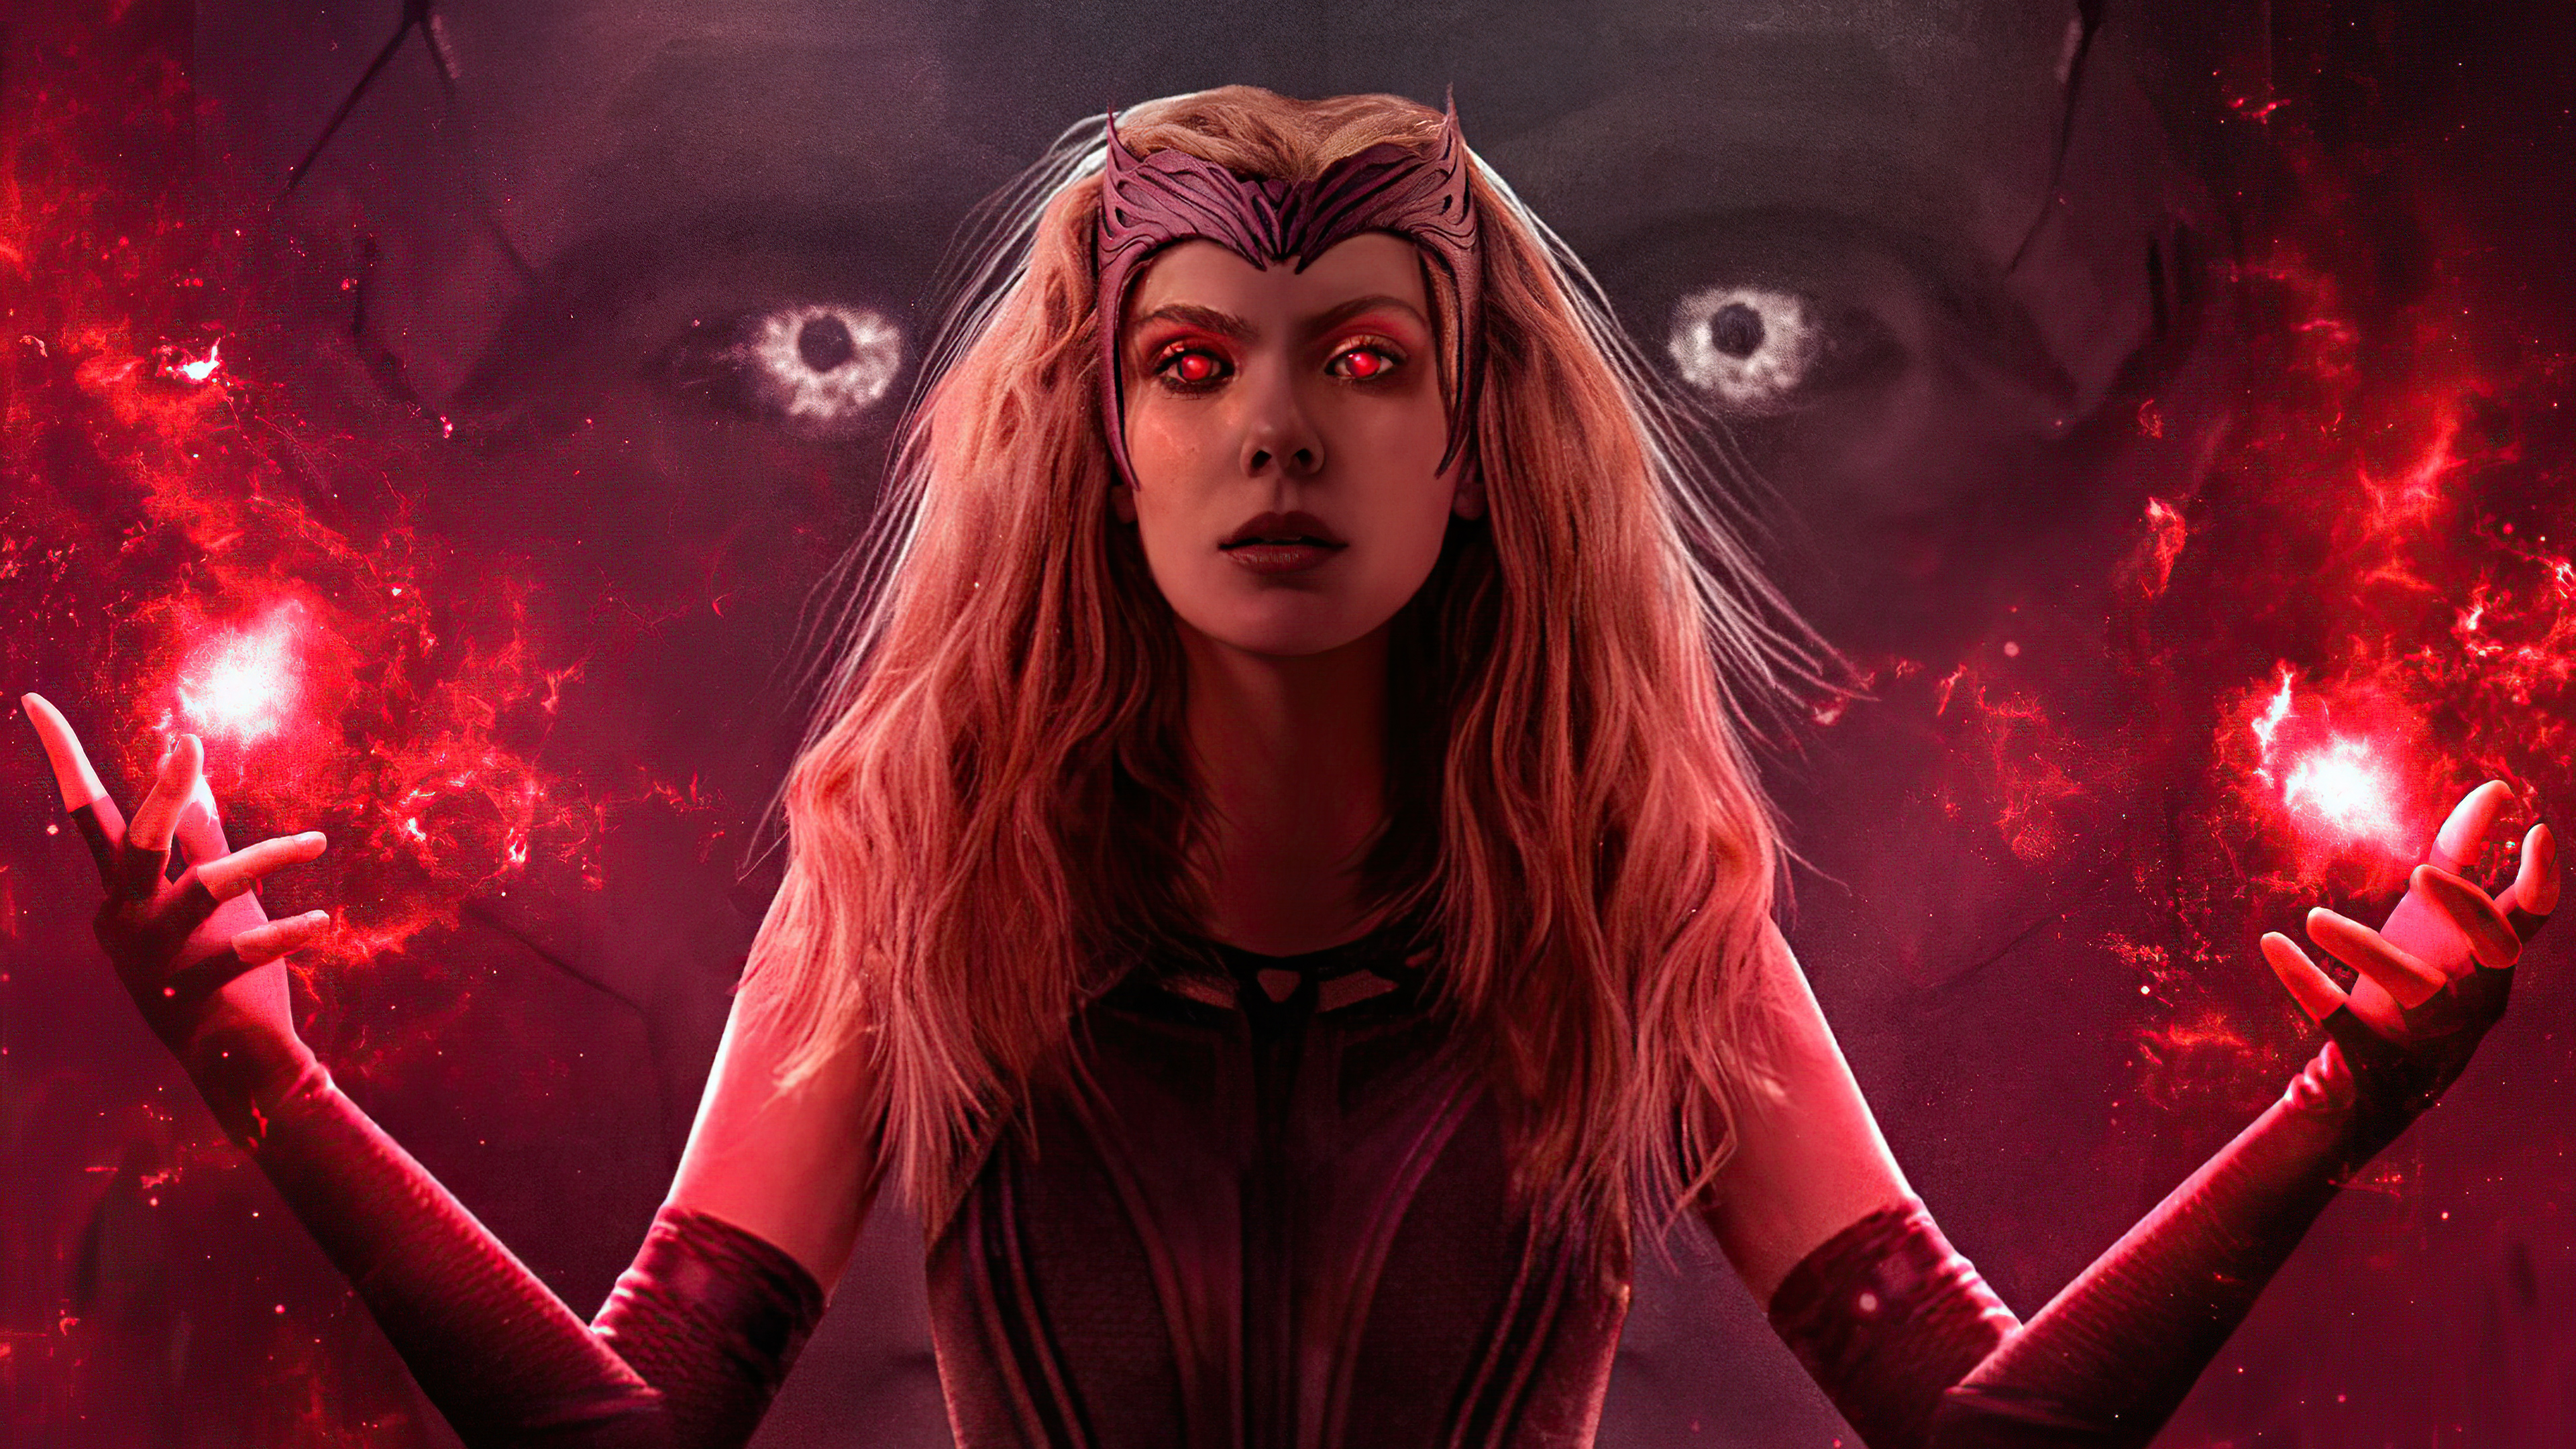 80 Wanda Maximoff HD Wallpapers and Backgrounds